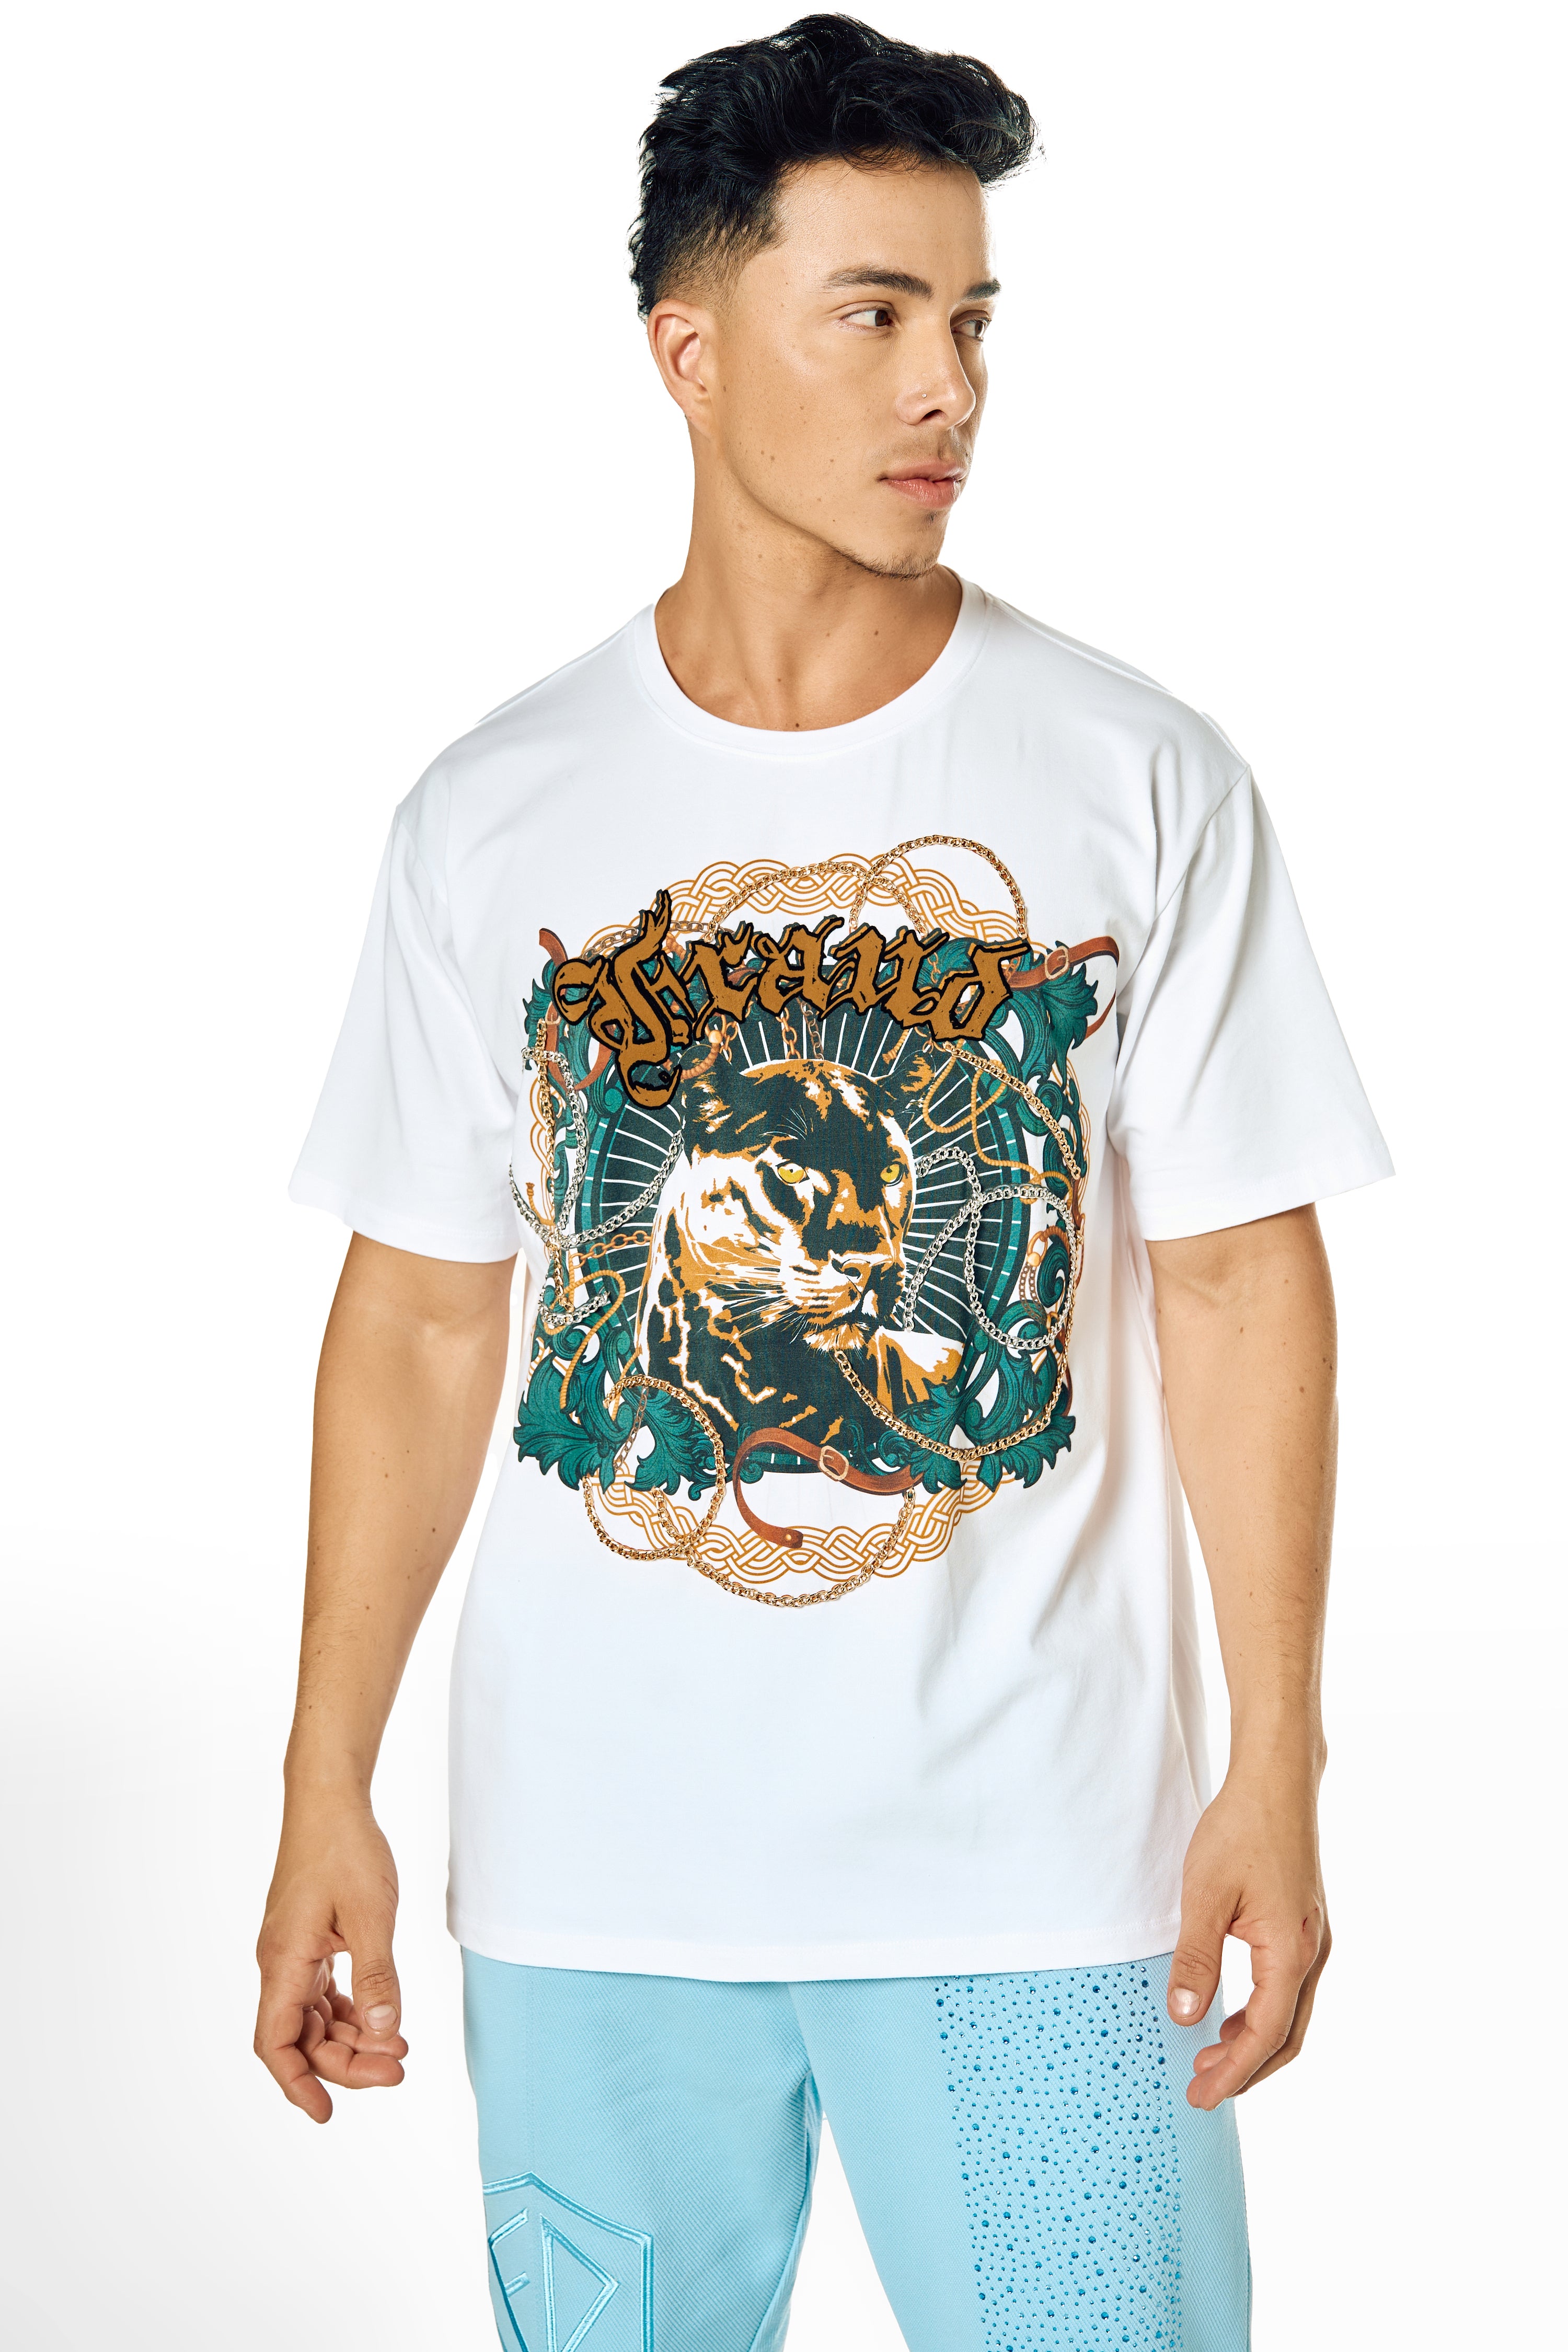 T-SHIRT WITH CHAINS , FLOCK PRINTING , PANTERA